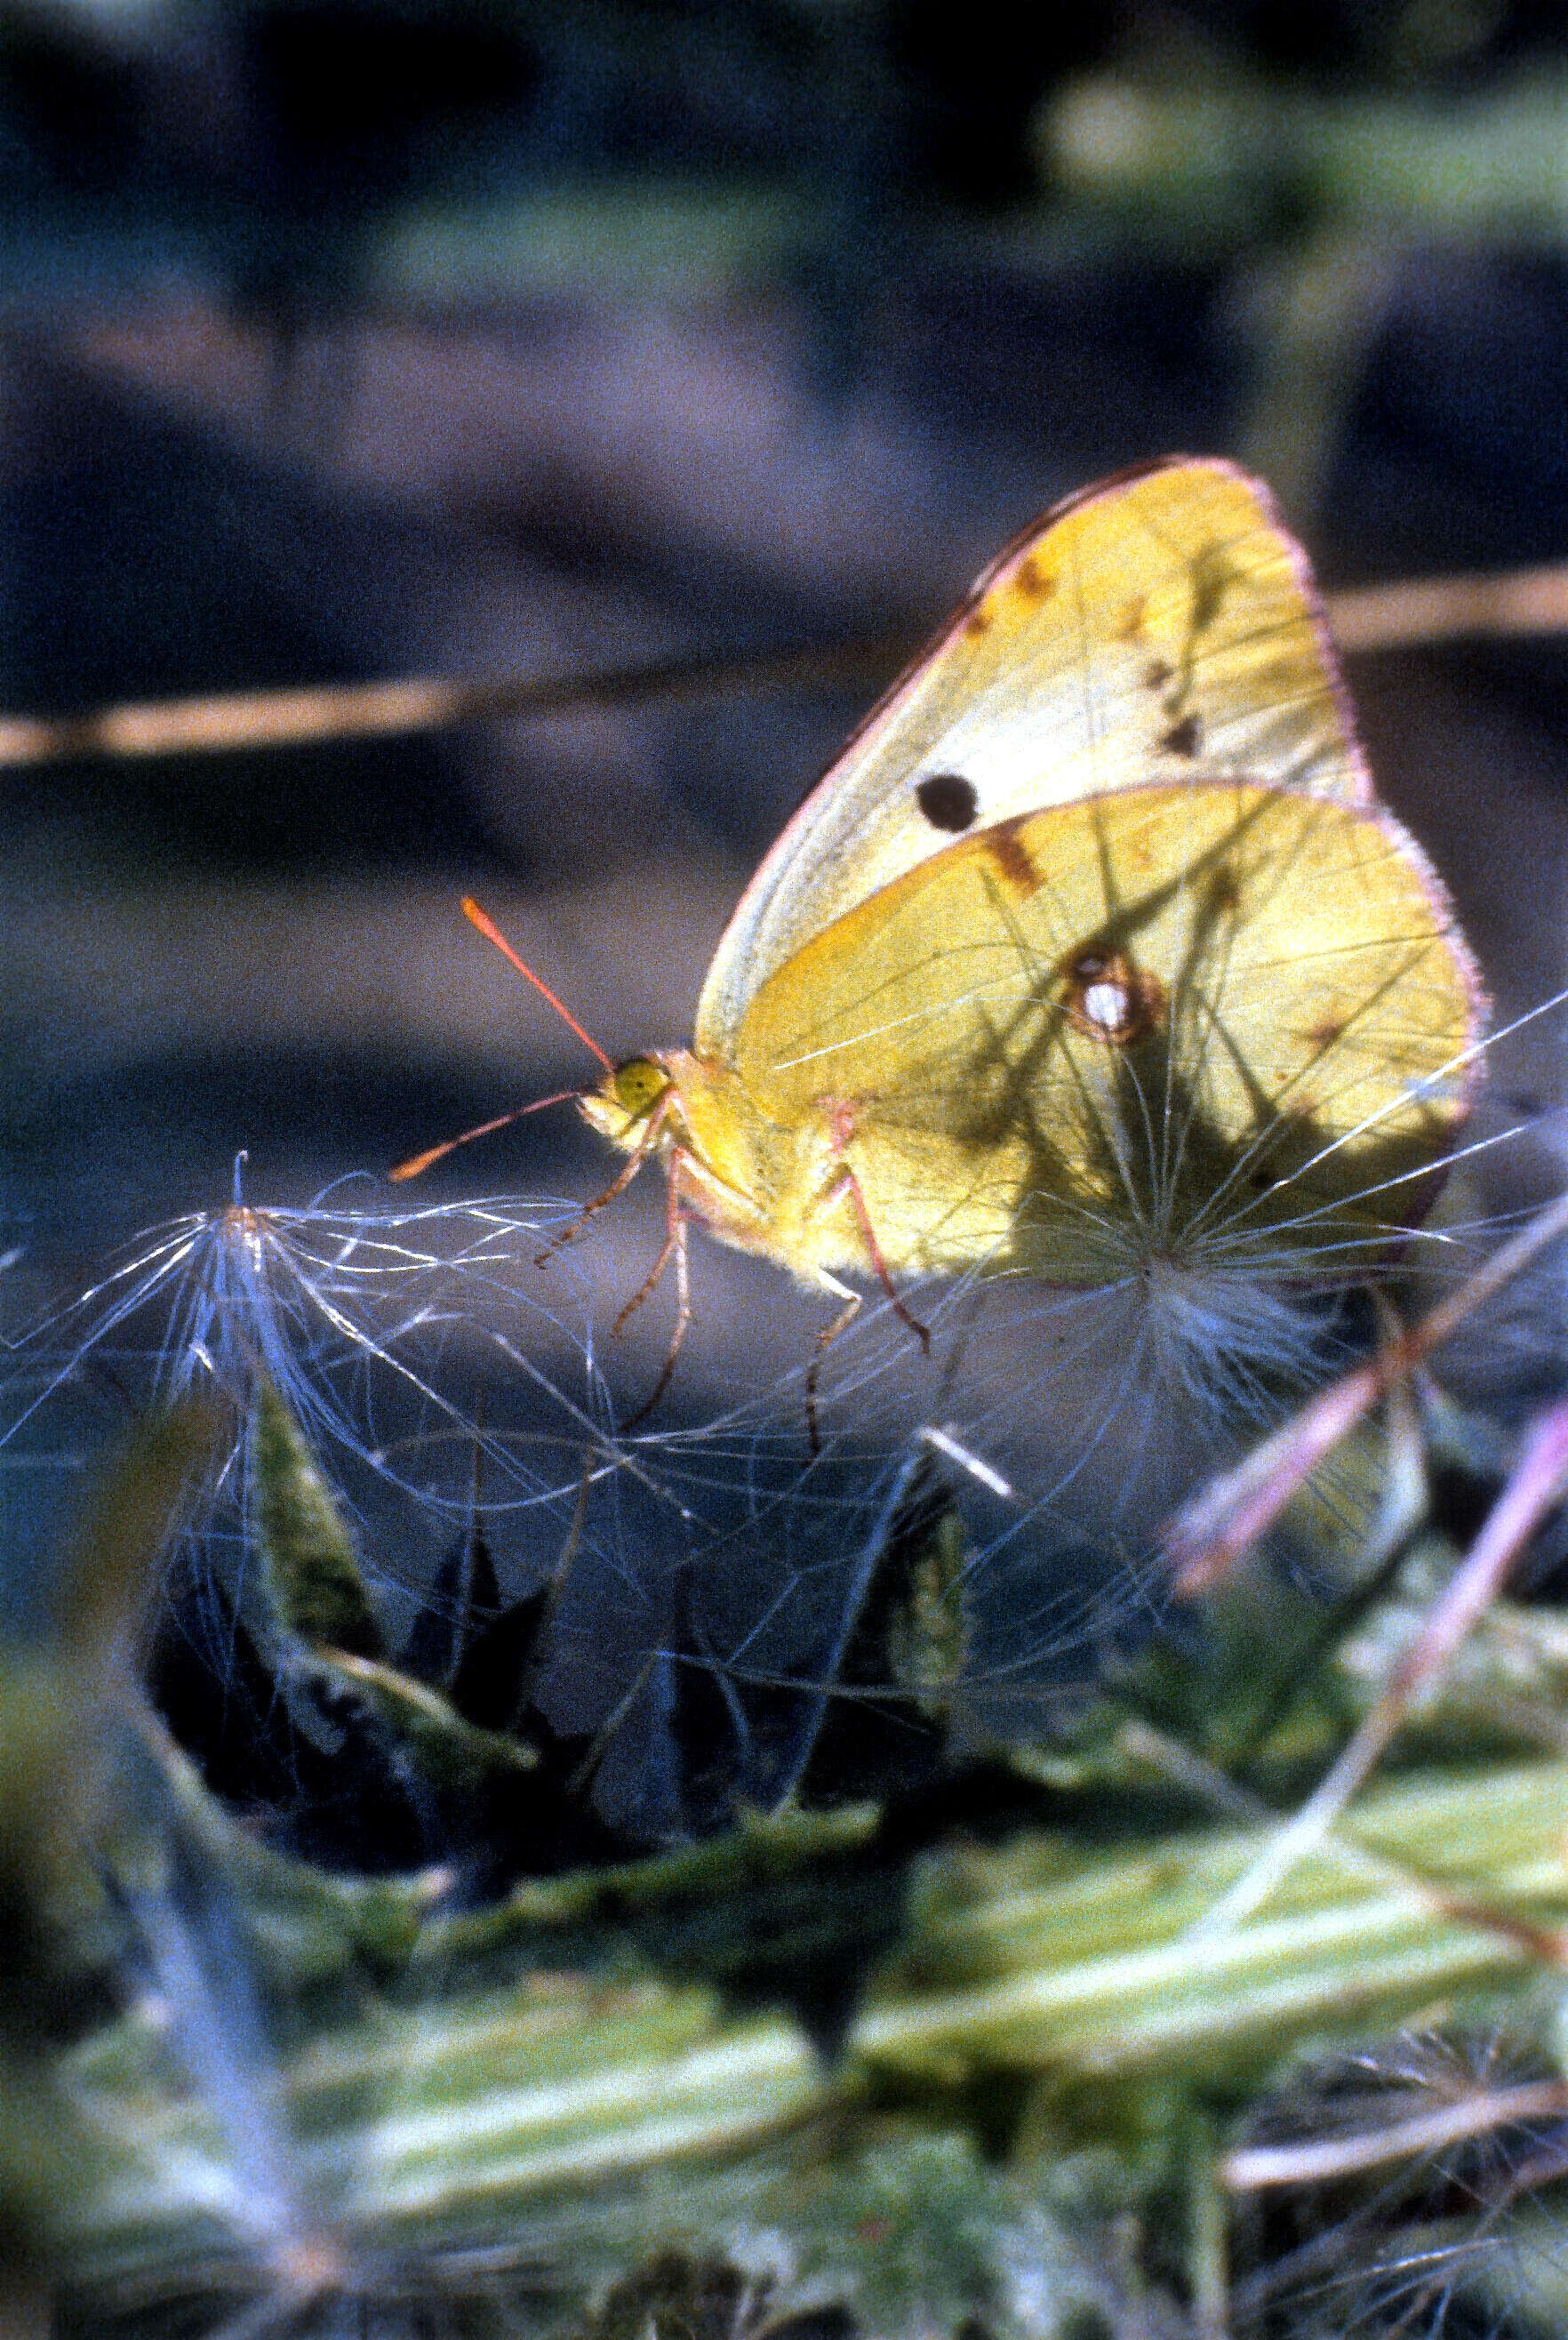 But this was no ordinary Clouded Yellow.... she was of the rare whiter form helice.